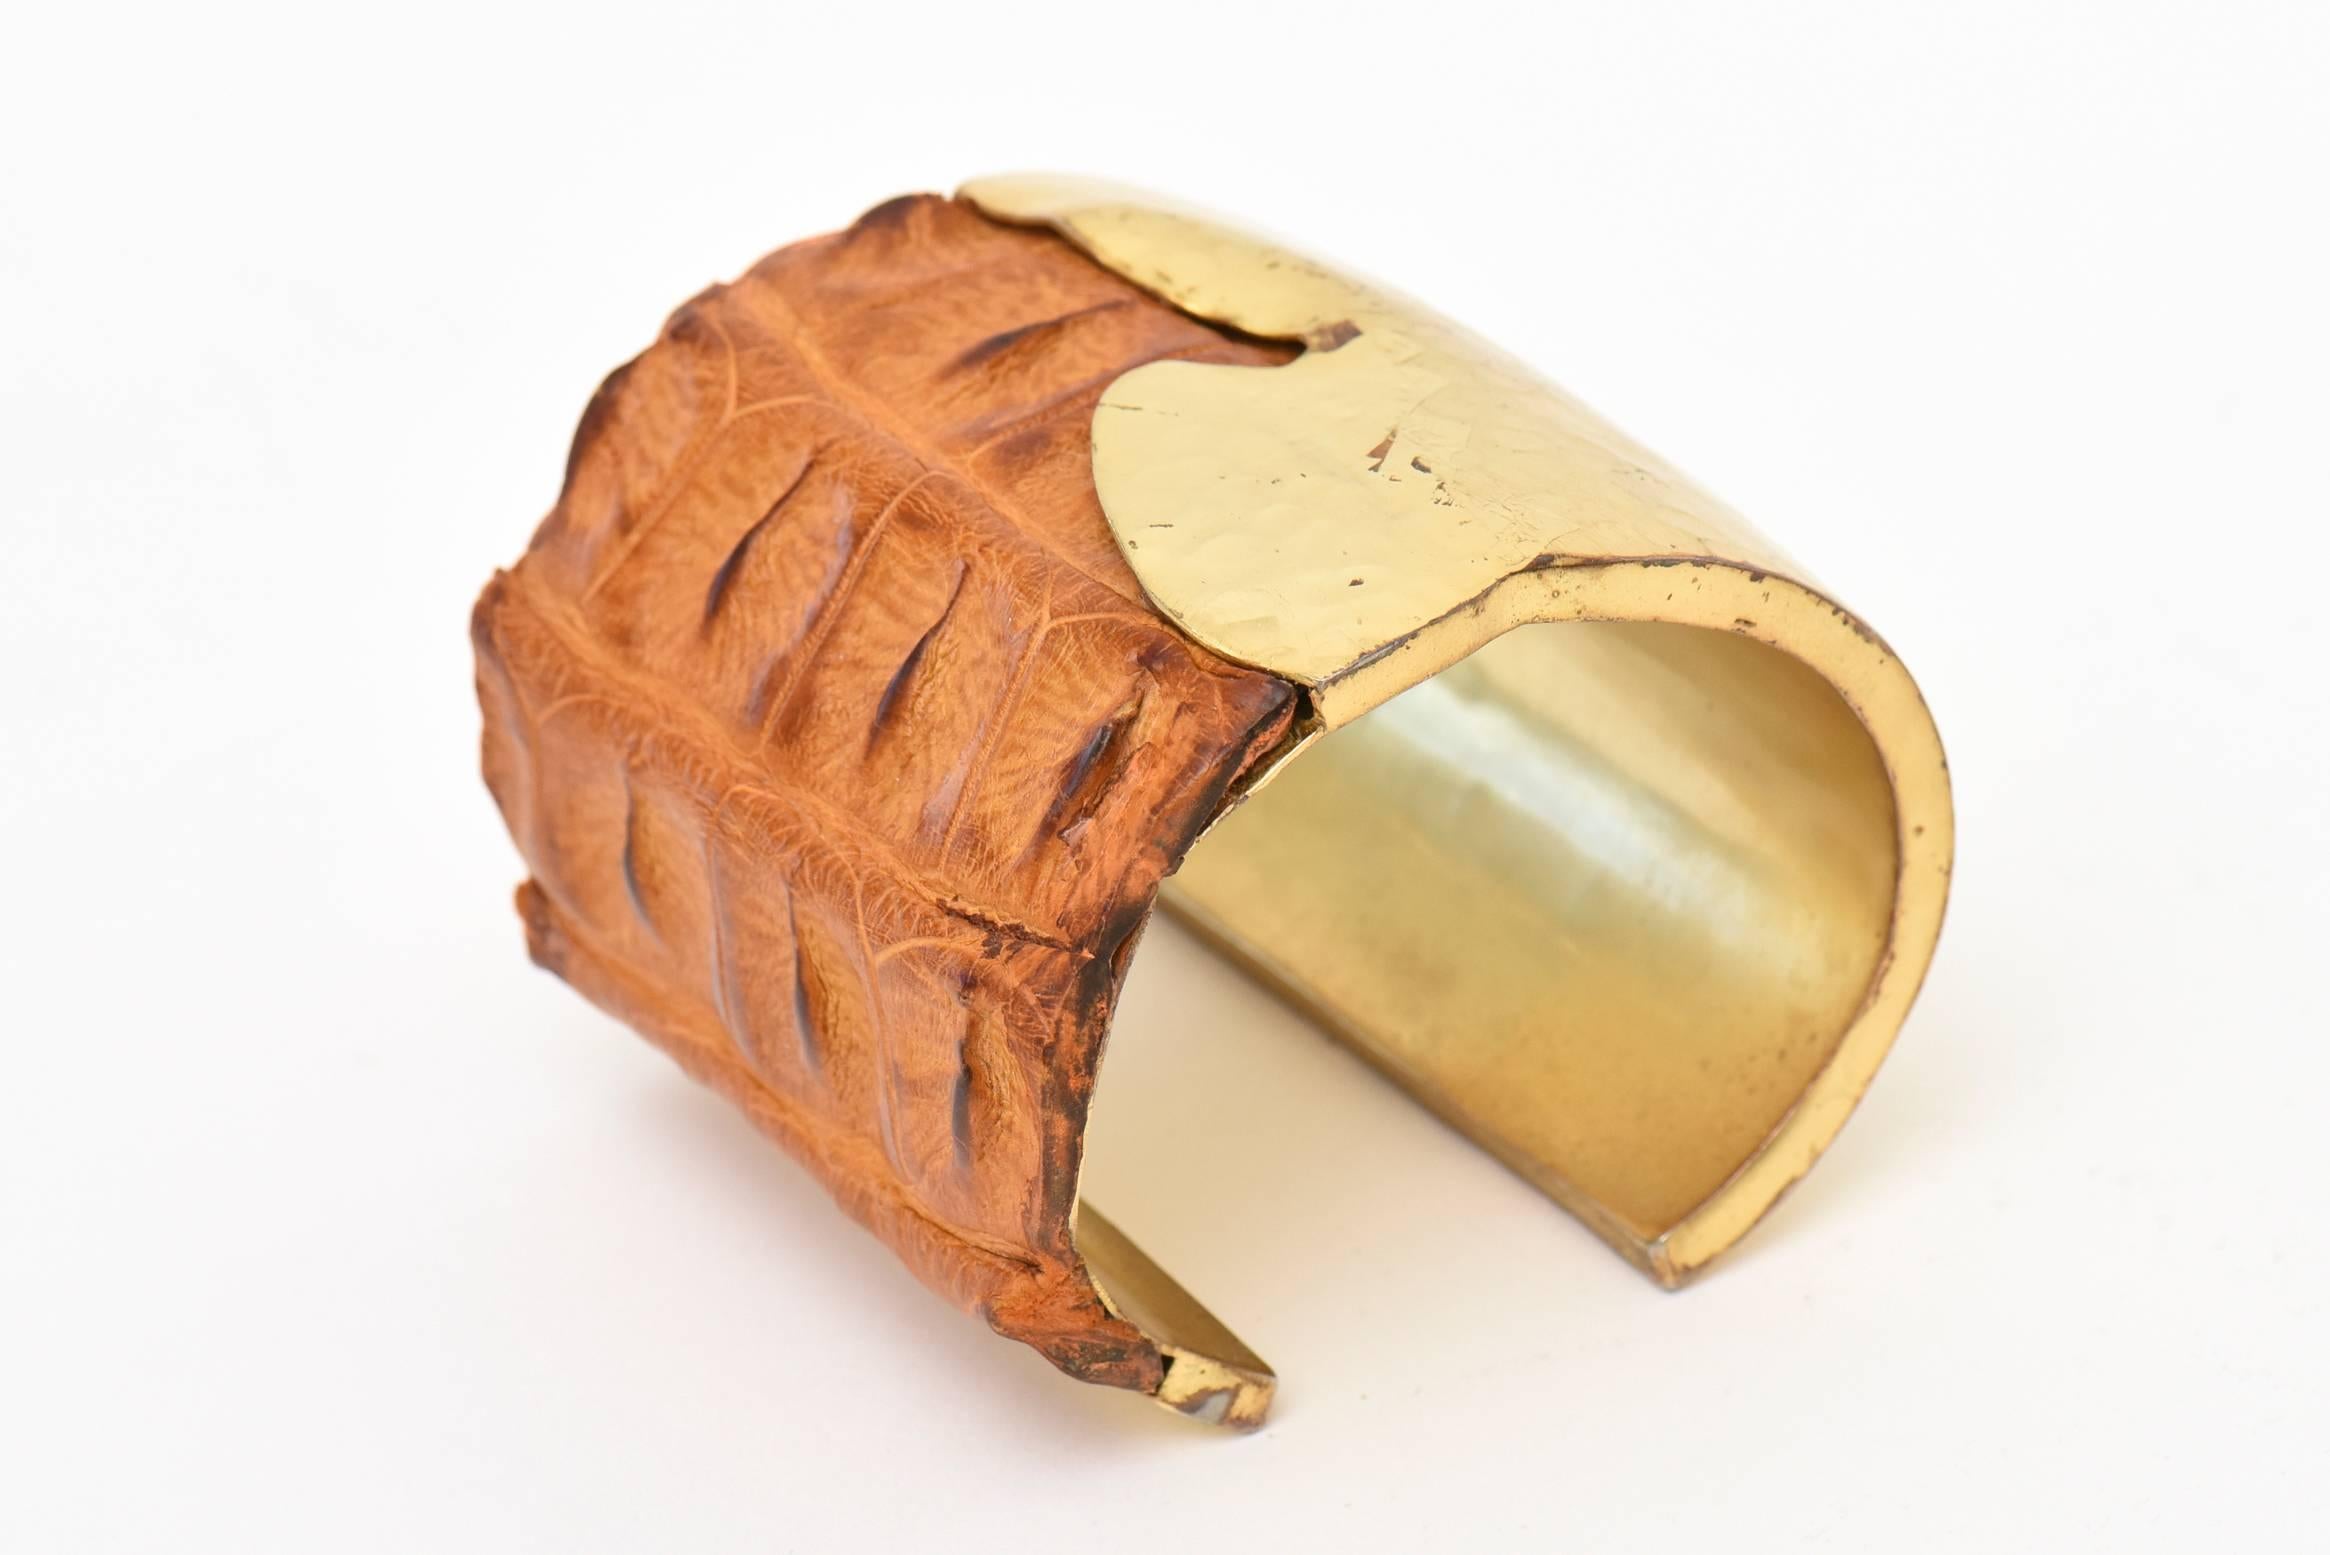 This studio signed Nada Sawaya New York hand hammered brass and brown crocodile leather wide cuff bracelet is very sculptural. It is beautiful on the wrist. The cuff bracelet is 2.25 